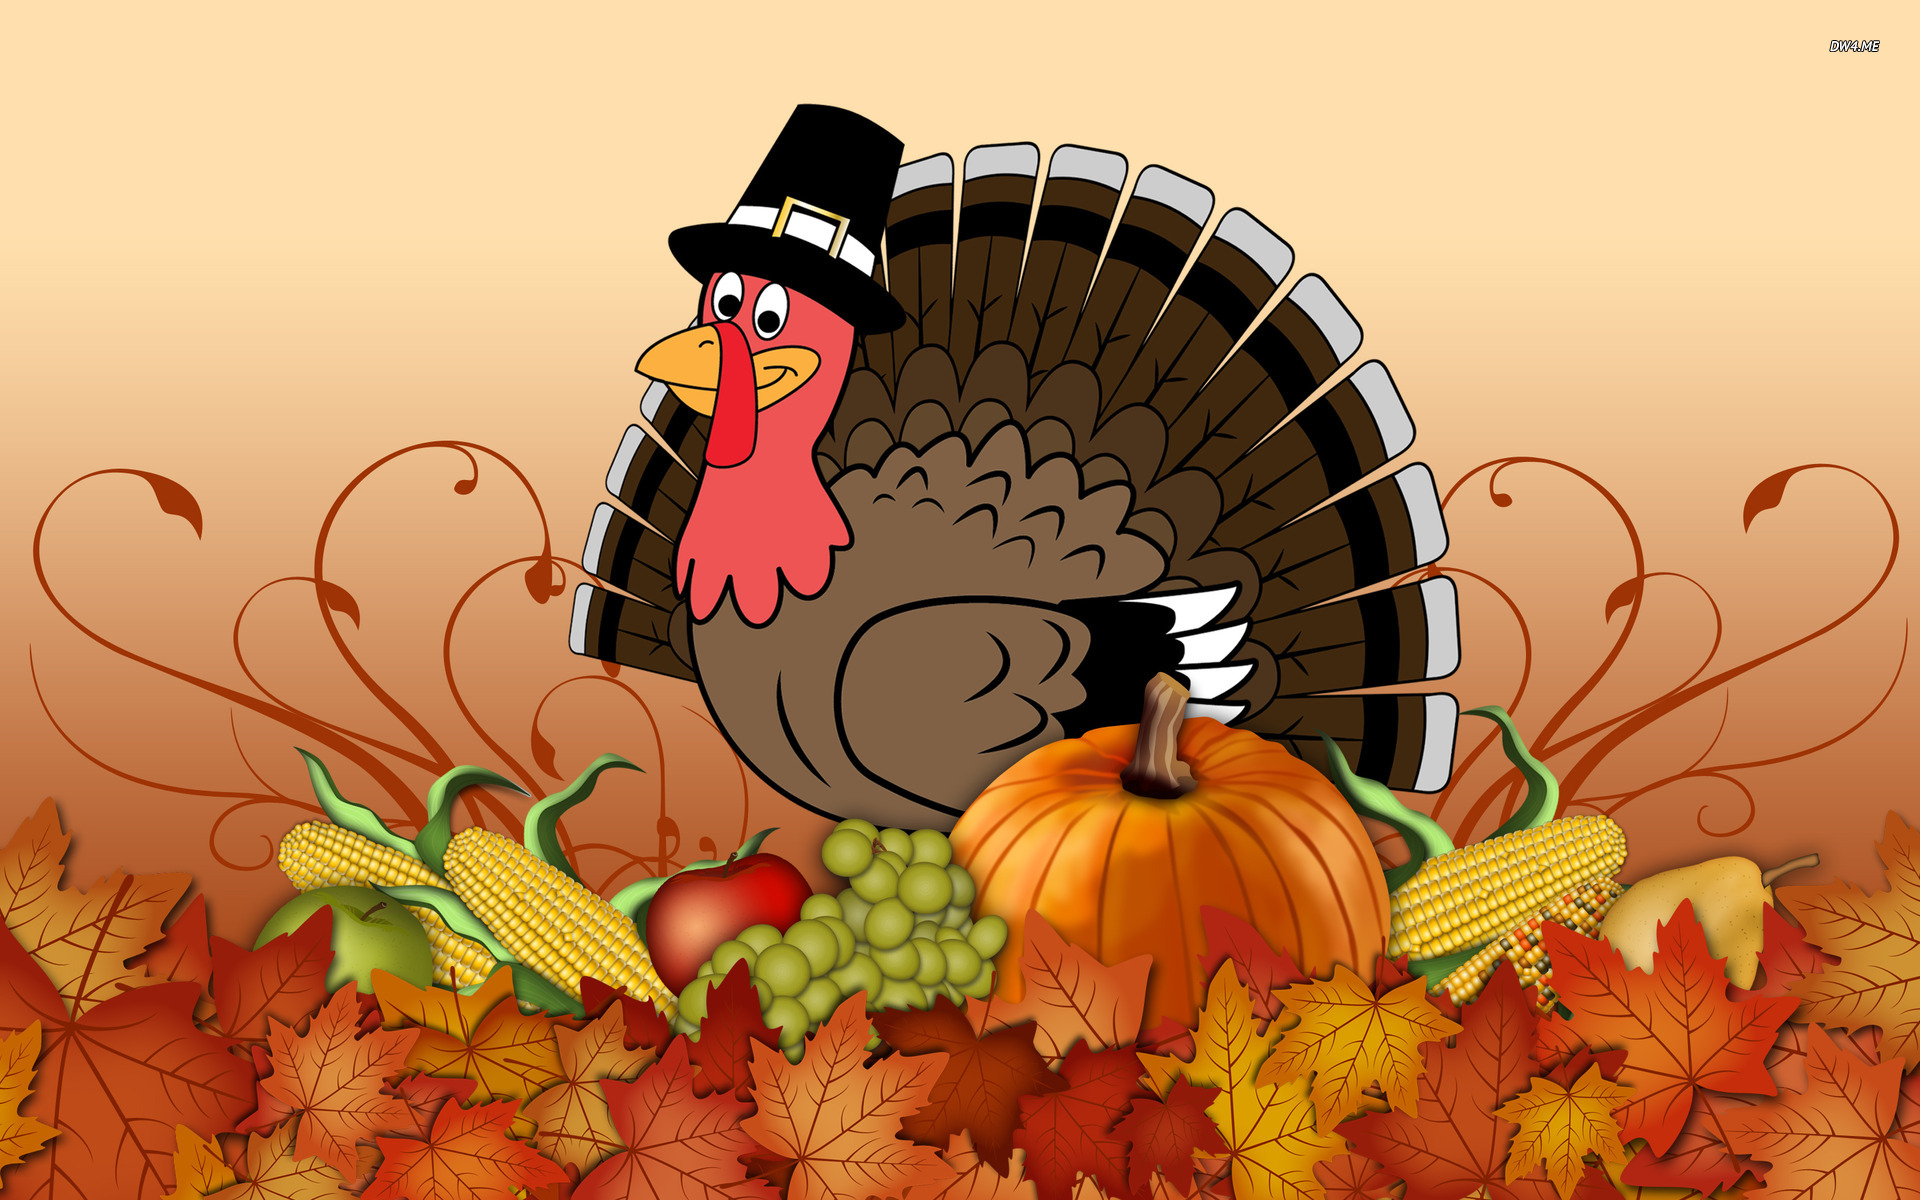 Happy Thanksgiving wallpaper Holiday wallpapers